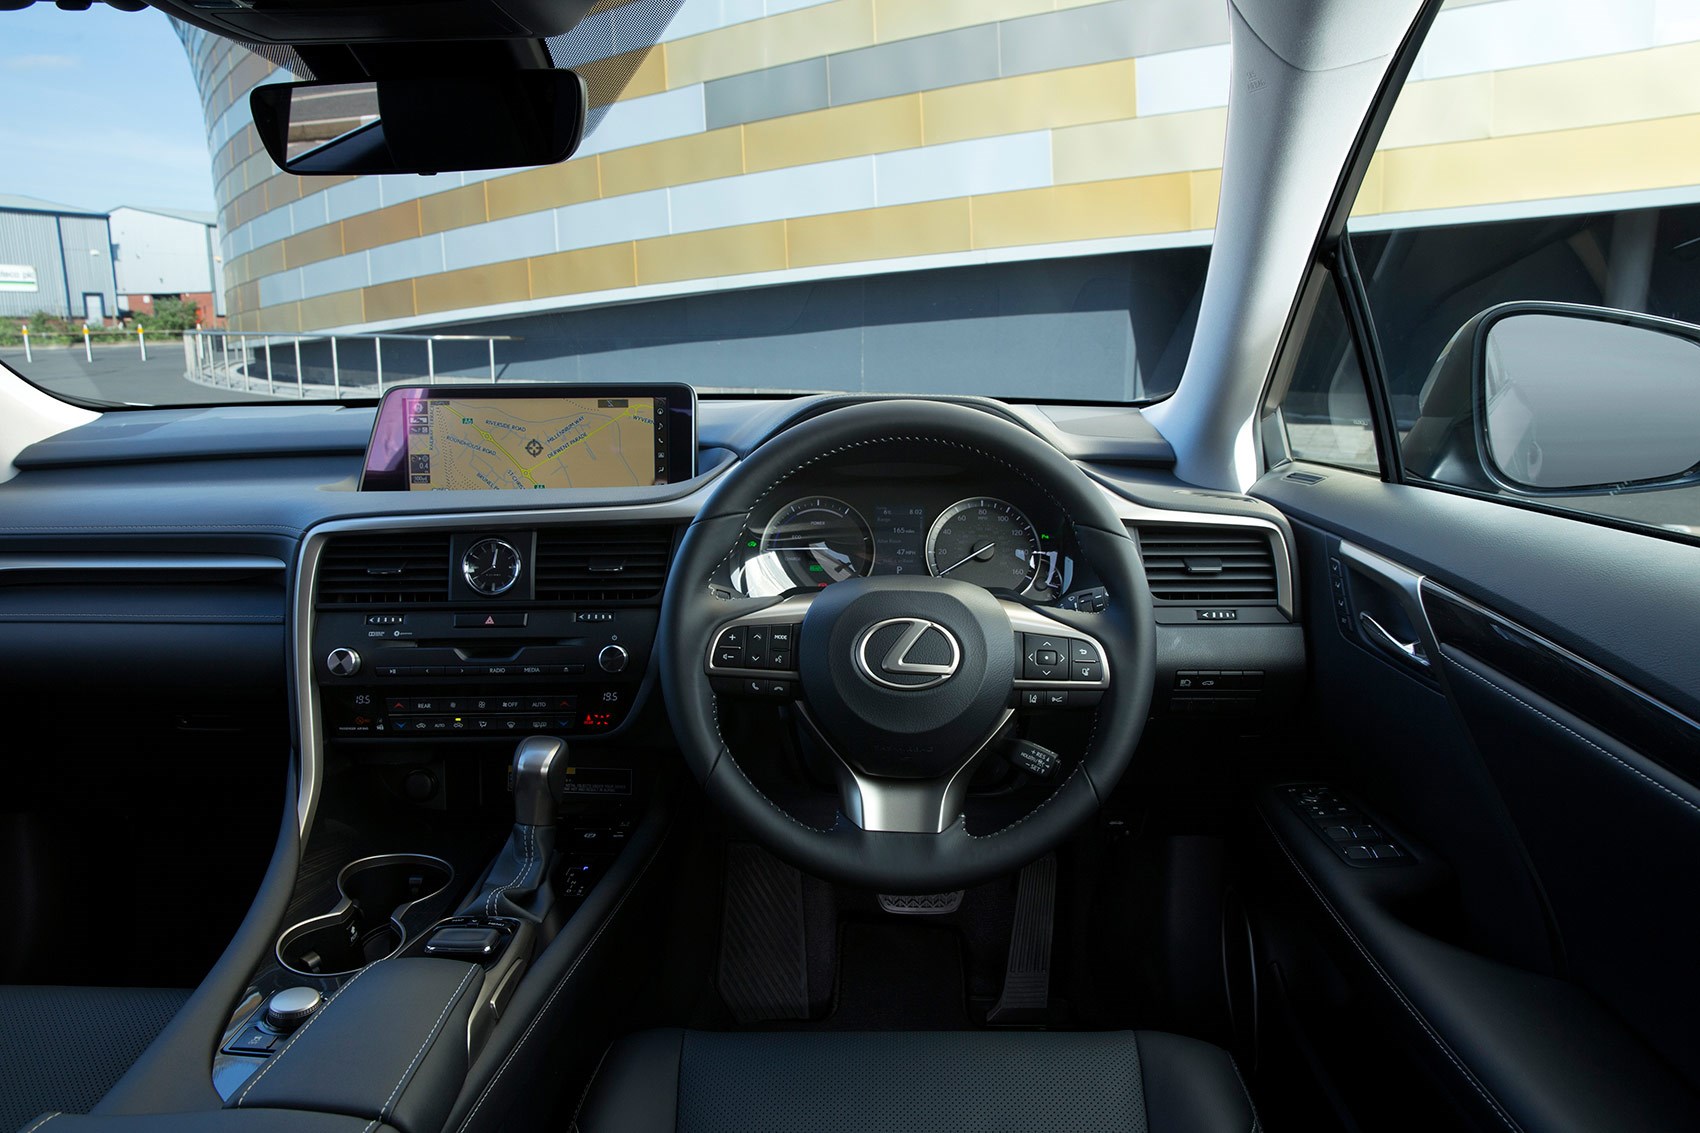 Lexus RX 450hL interior: a well built cabin, but terrible infotainment media system